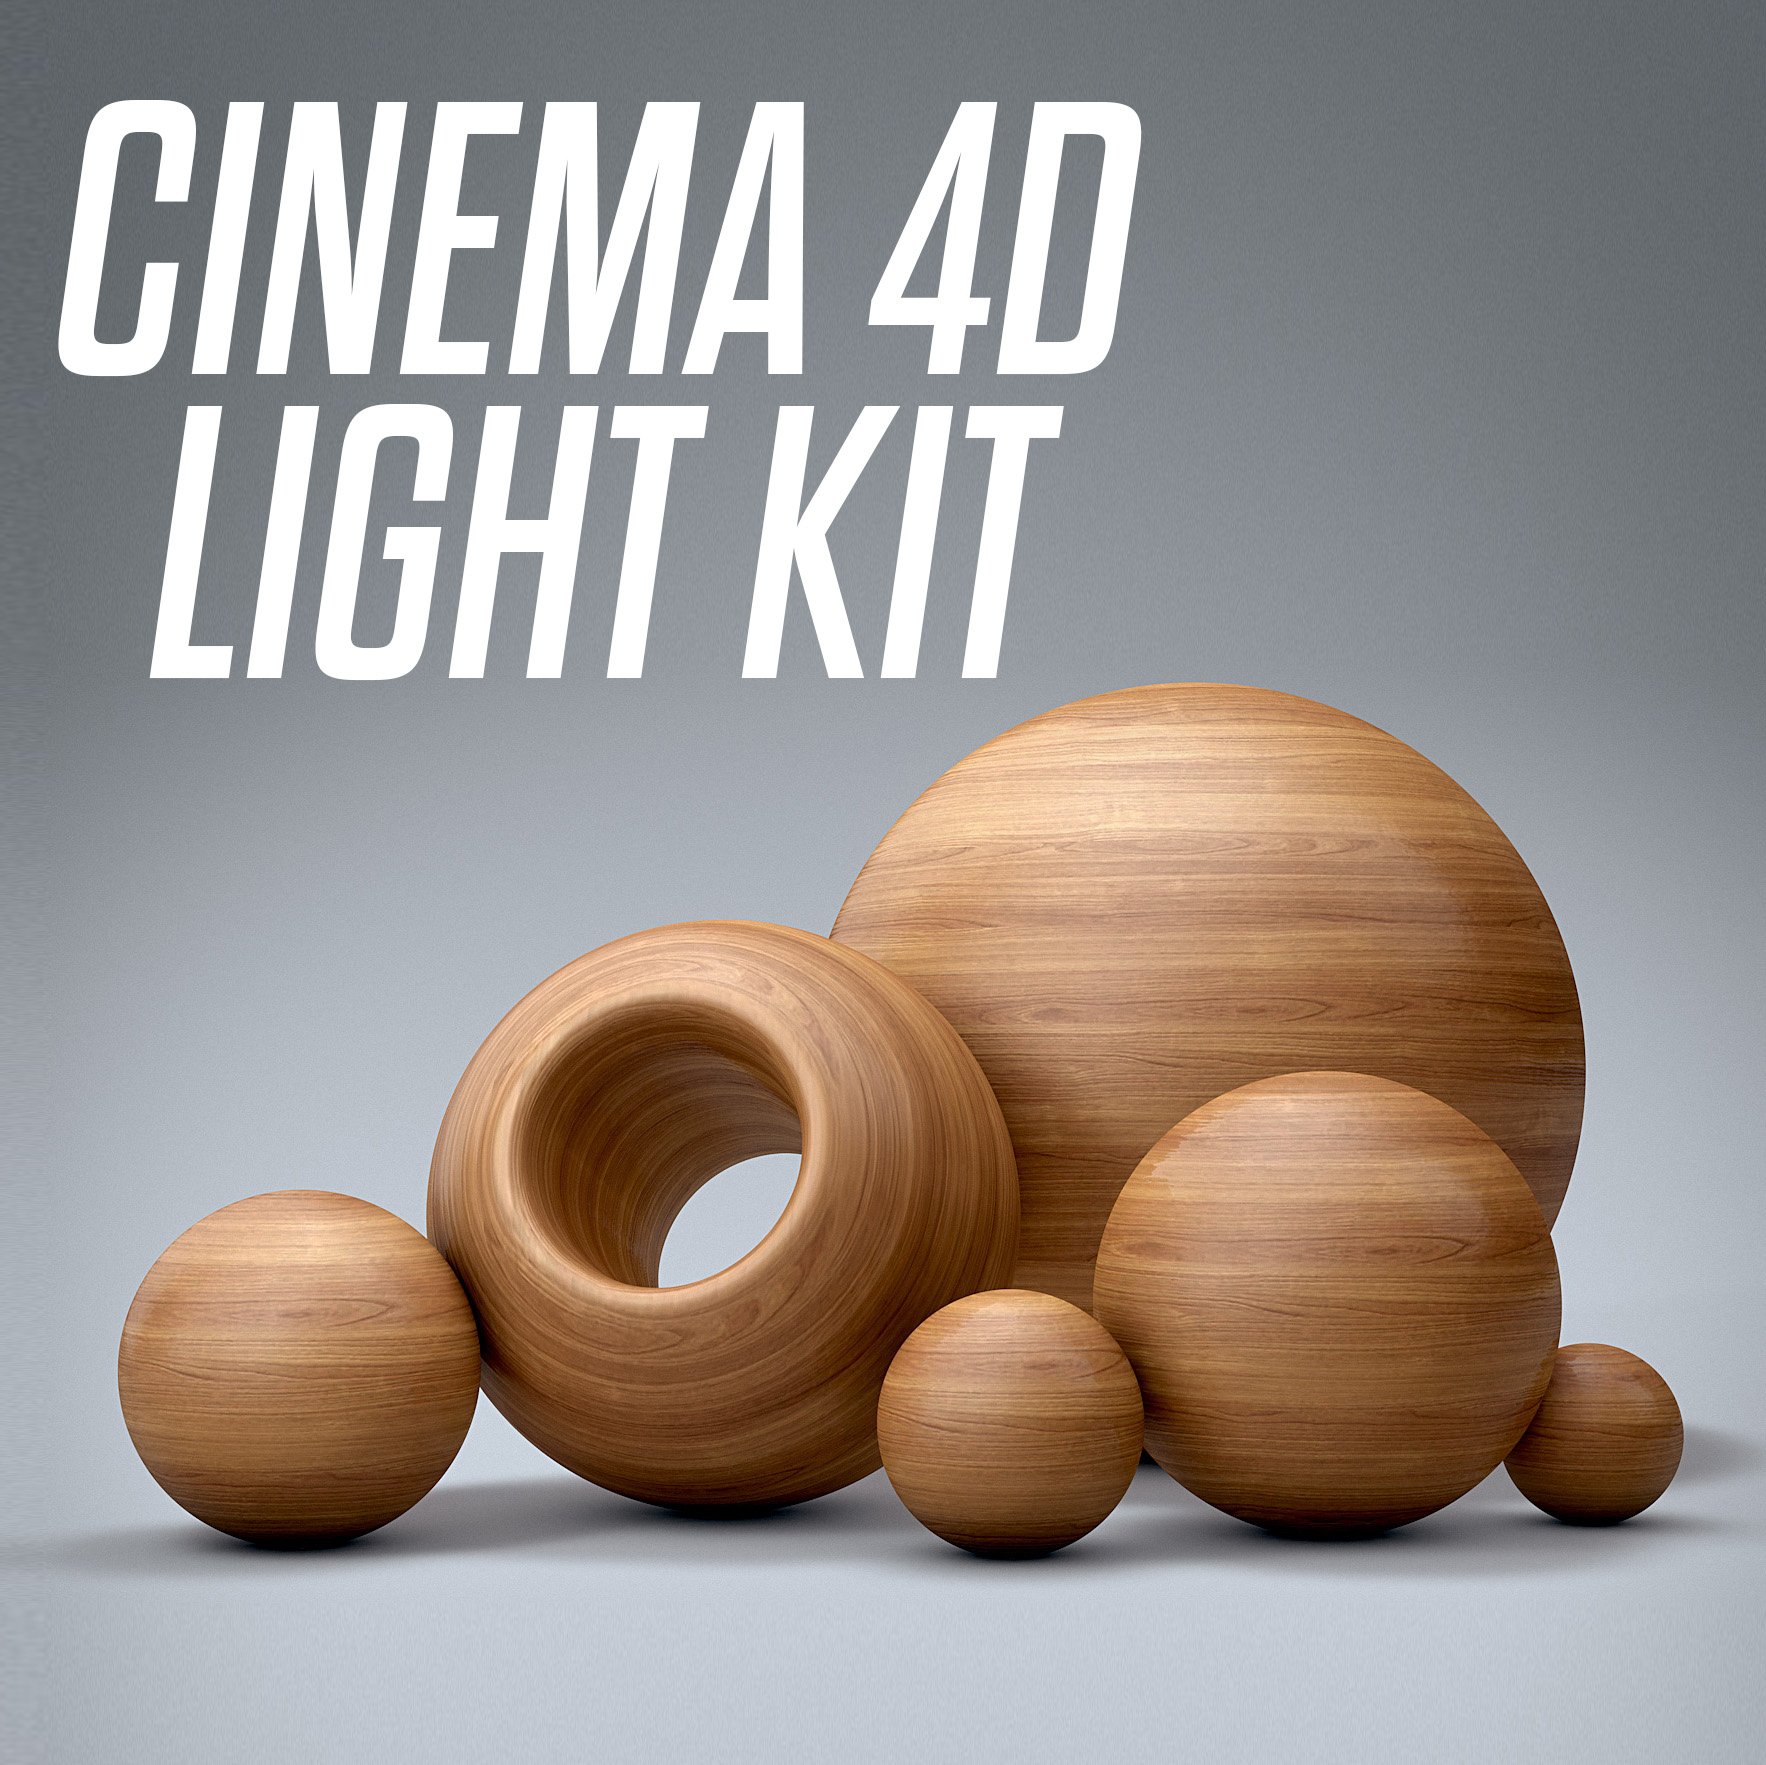 maxon cinema 4d after effects